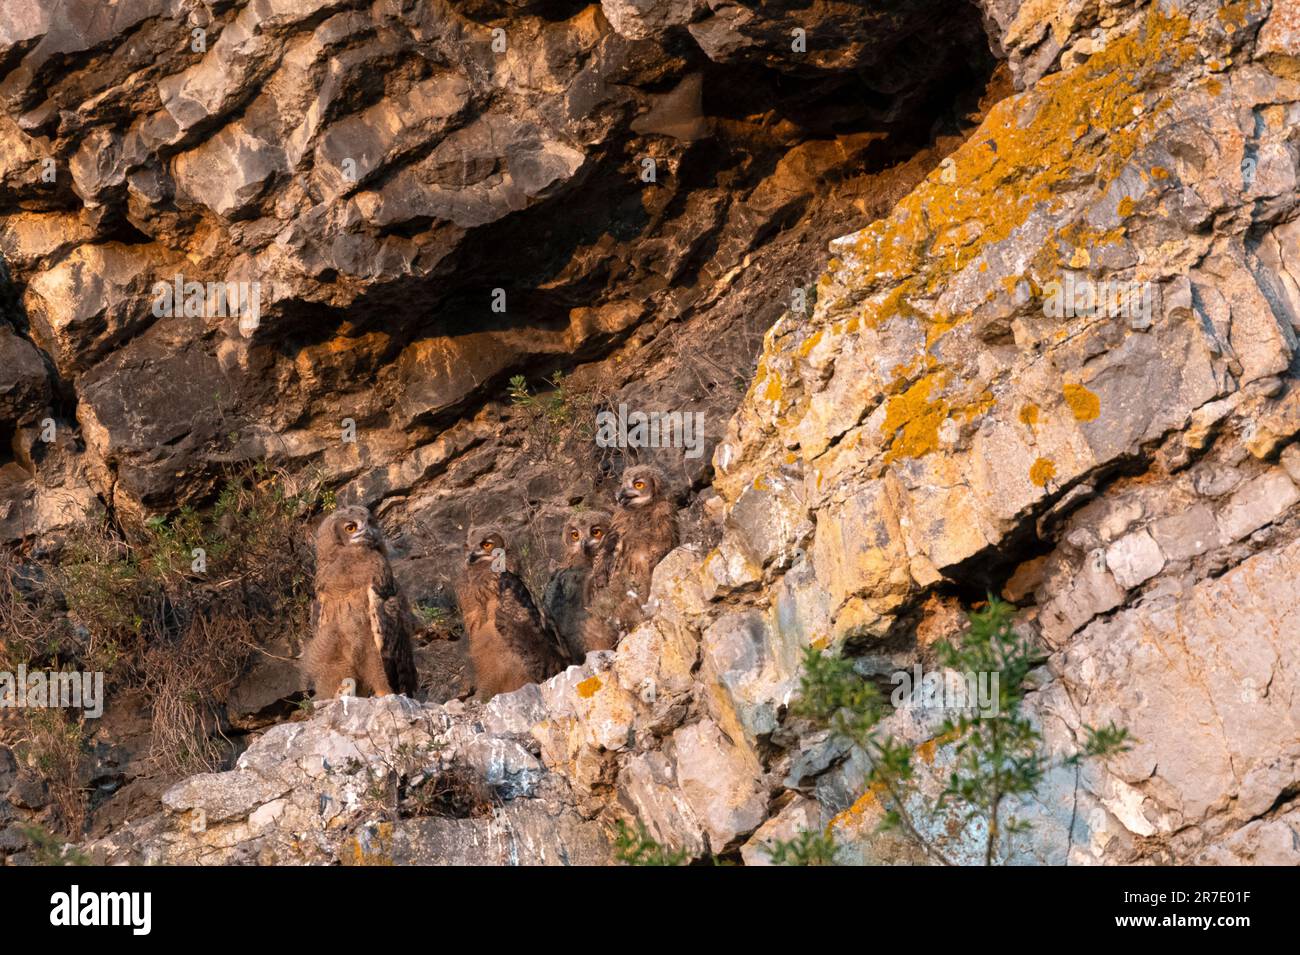 A nest with 4 juvenile Eagle Owls (Bubo bubo) at sunset, in Belgium typically breeding in old quarries, or along the rock walls of the Meuse river val Stock Photo